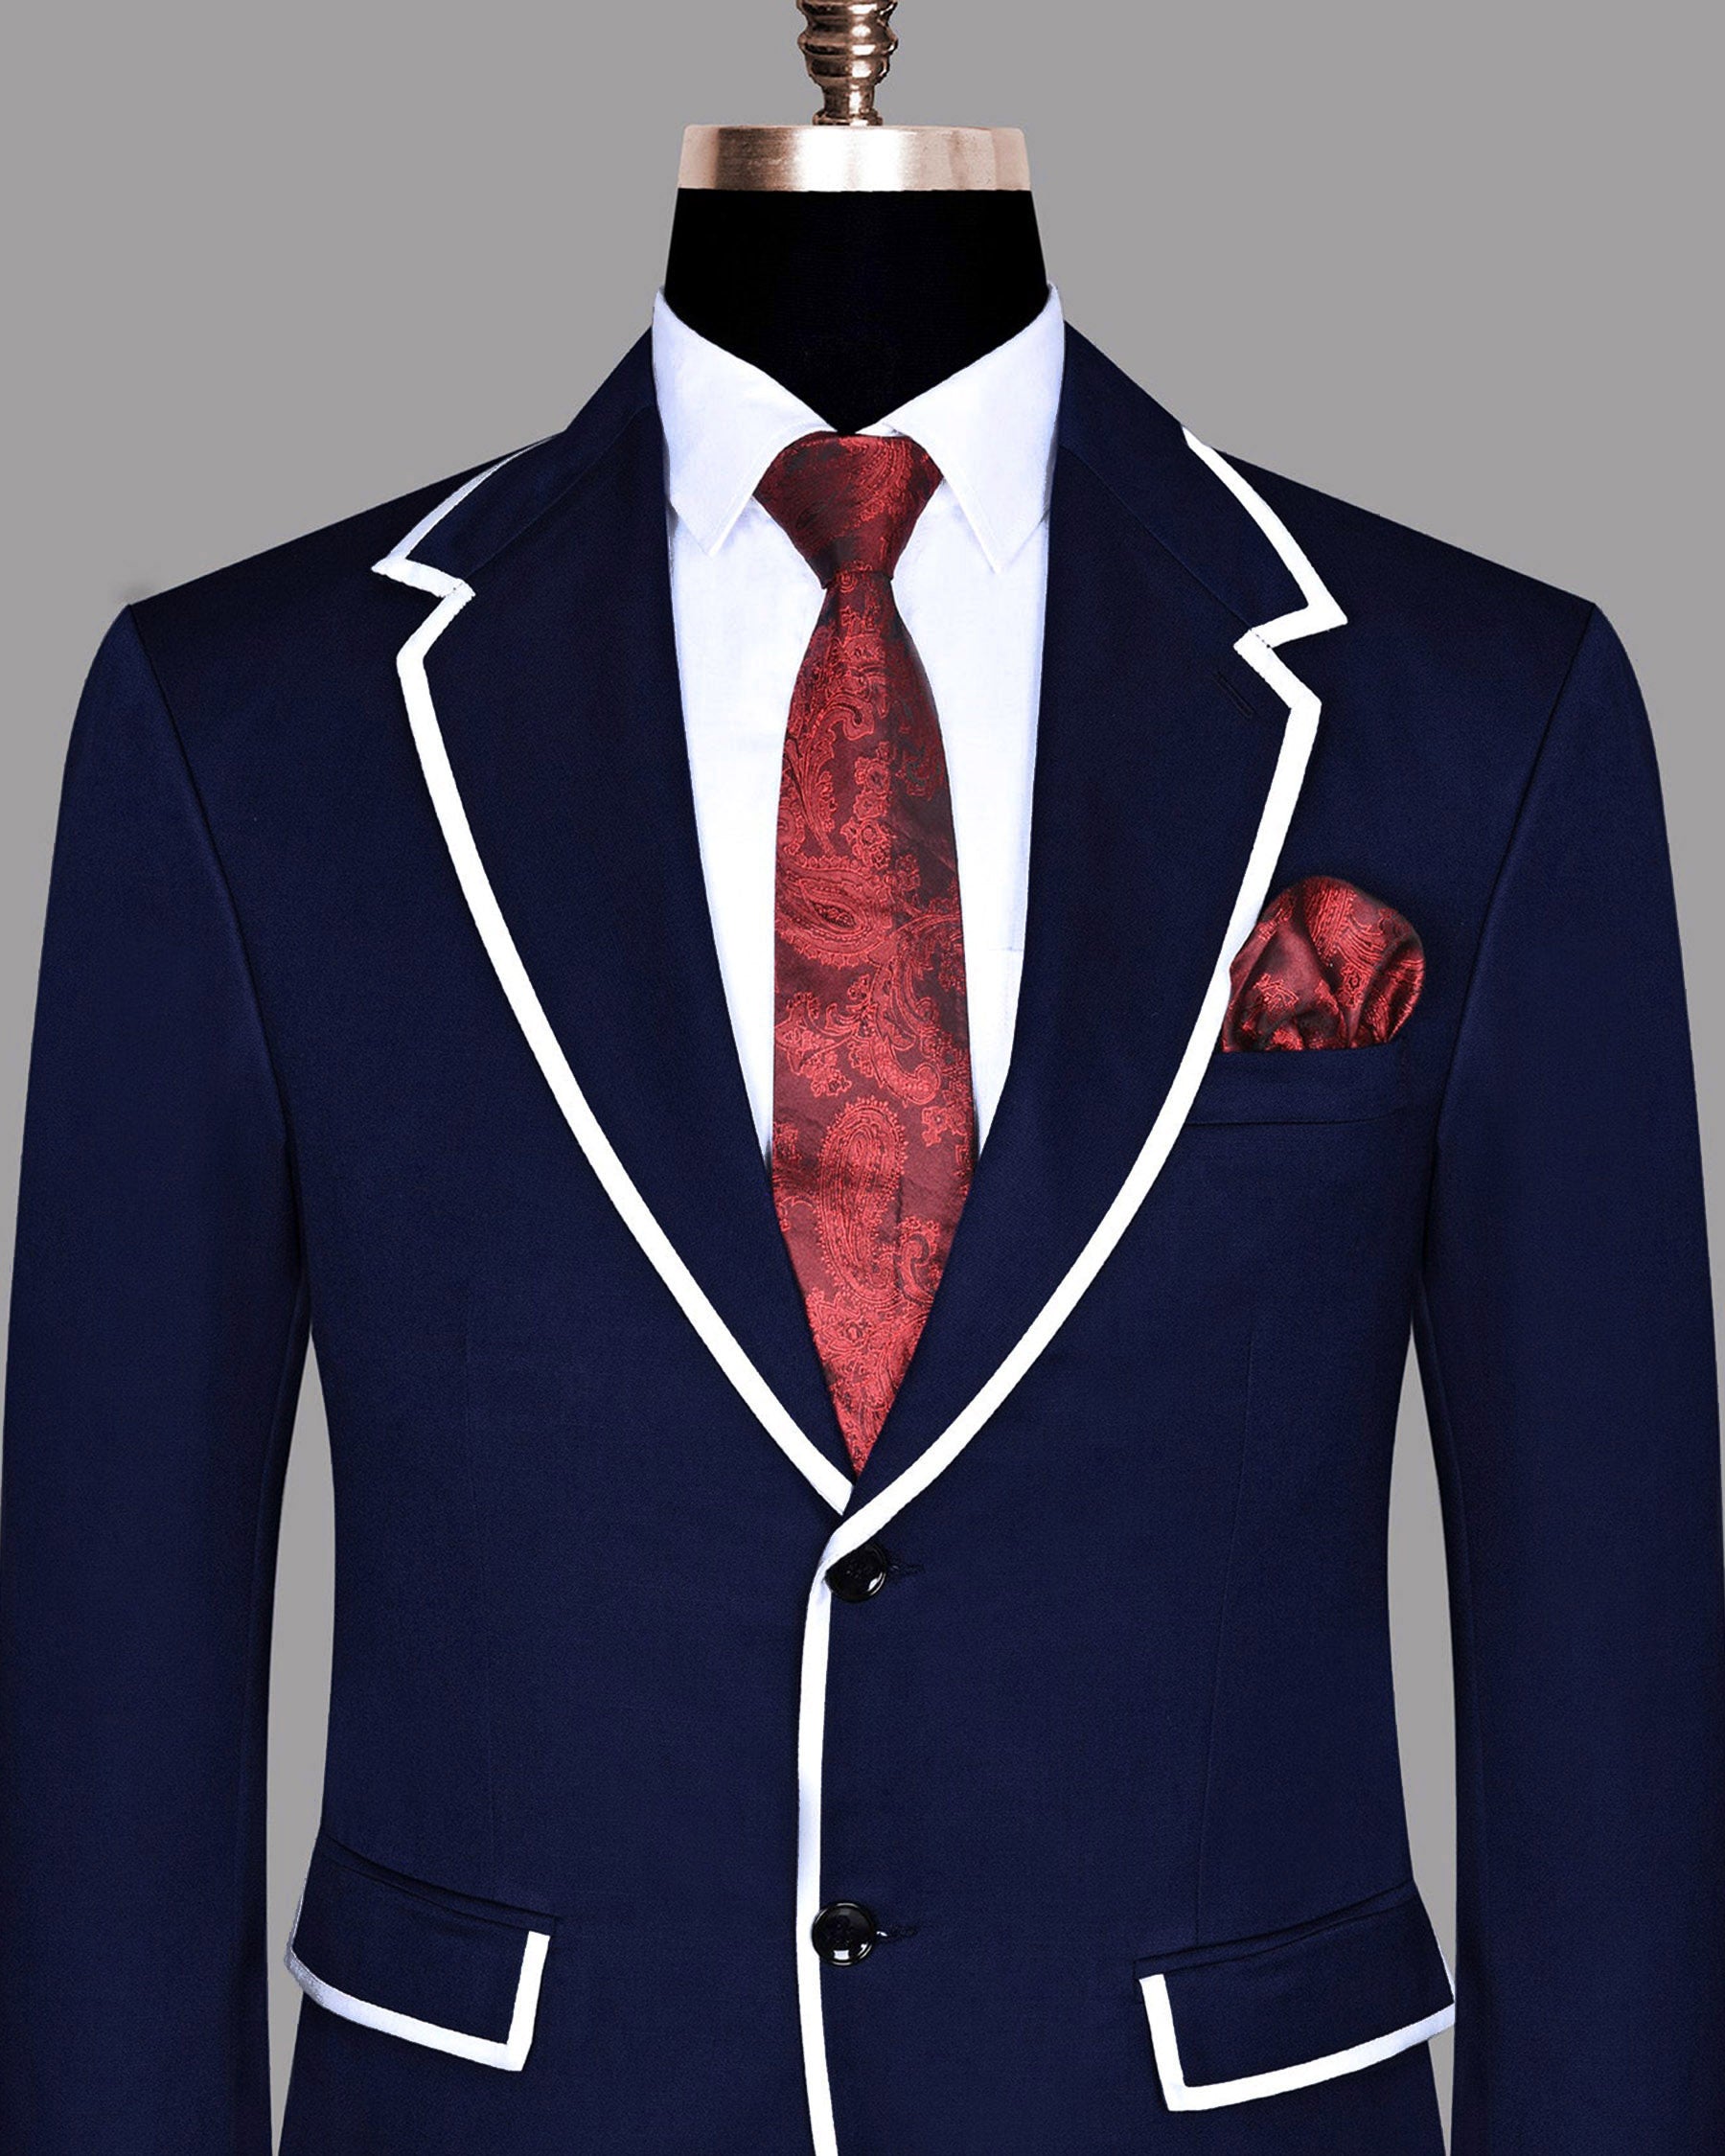 Space Blue Subtle Sheen with White Border Patterned Blazer